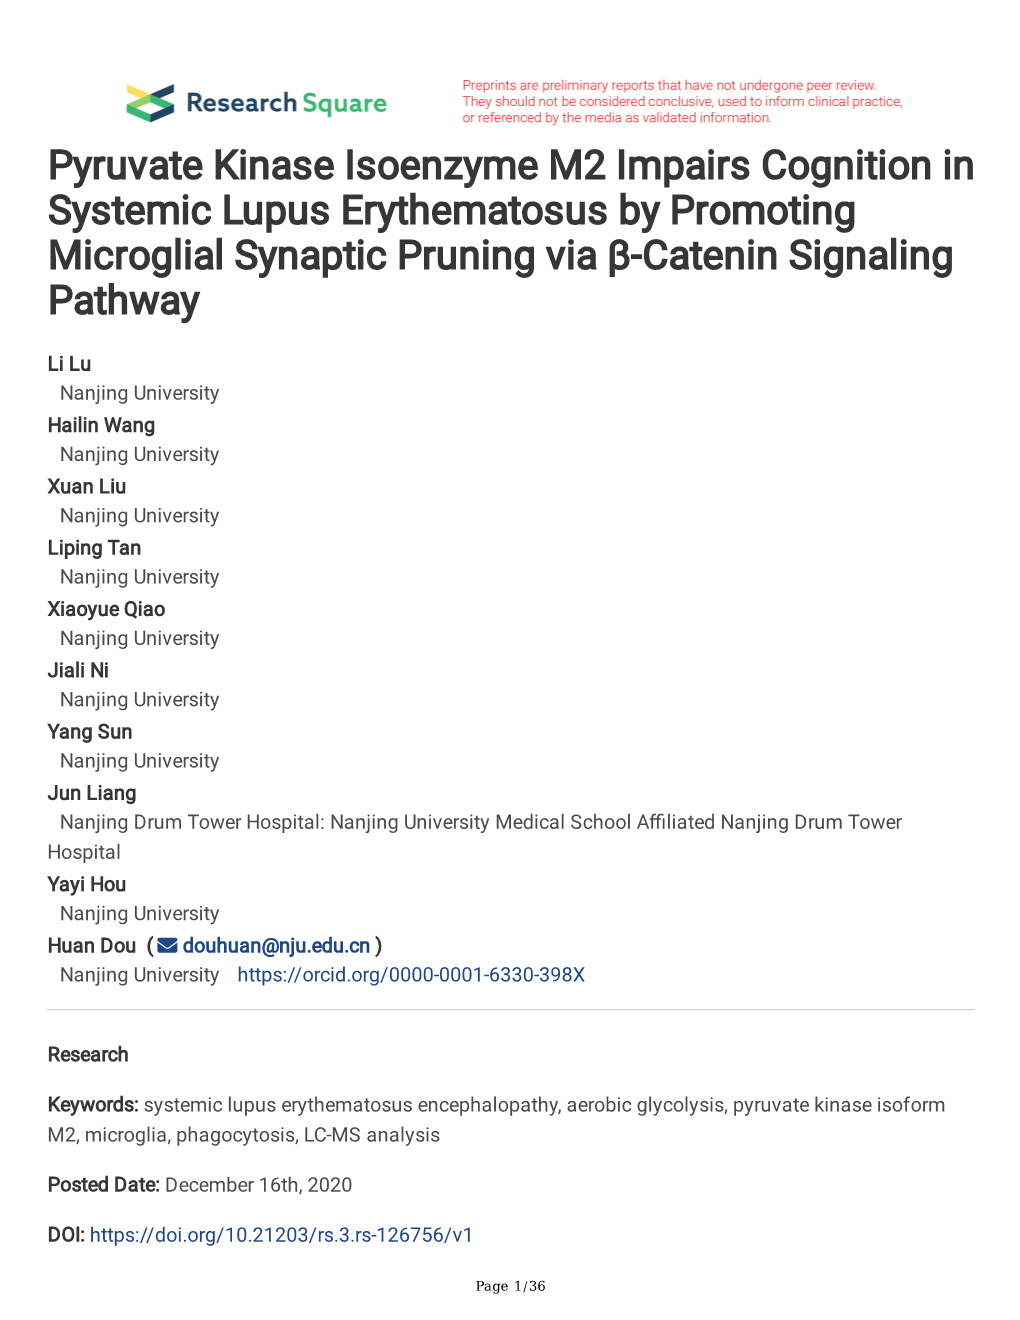 Pyruvate Kinase Isoenzyme M2 Impairs Cognition in Systemic Lupus Erythematosus by Promoting Microglial Synaptic Pruning Via Β-Catenin Signaling Pathway